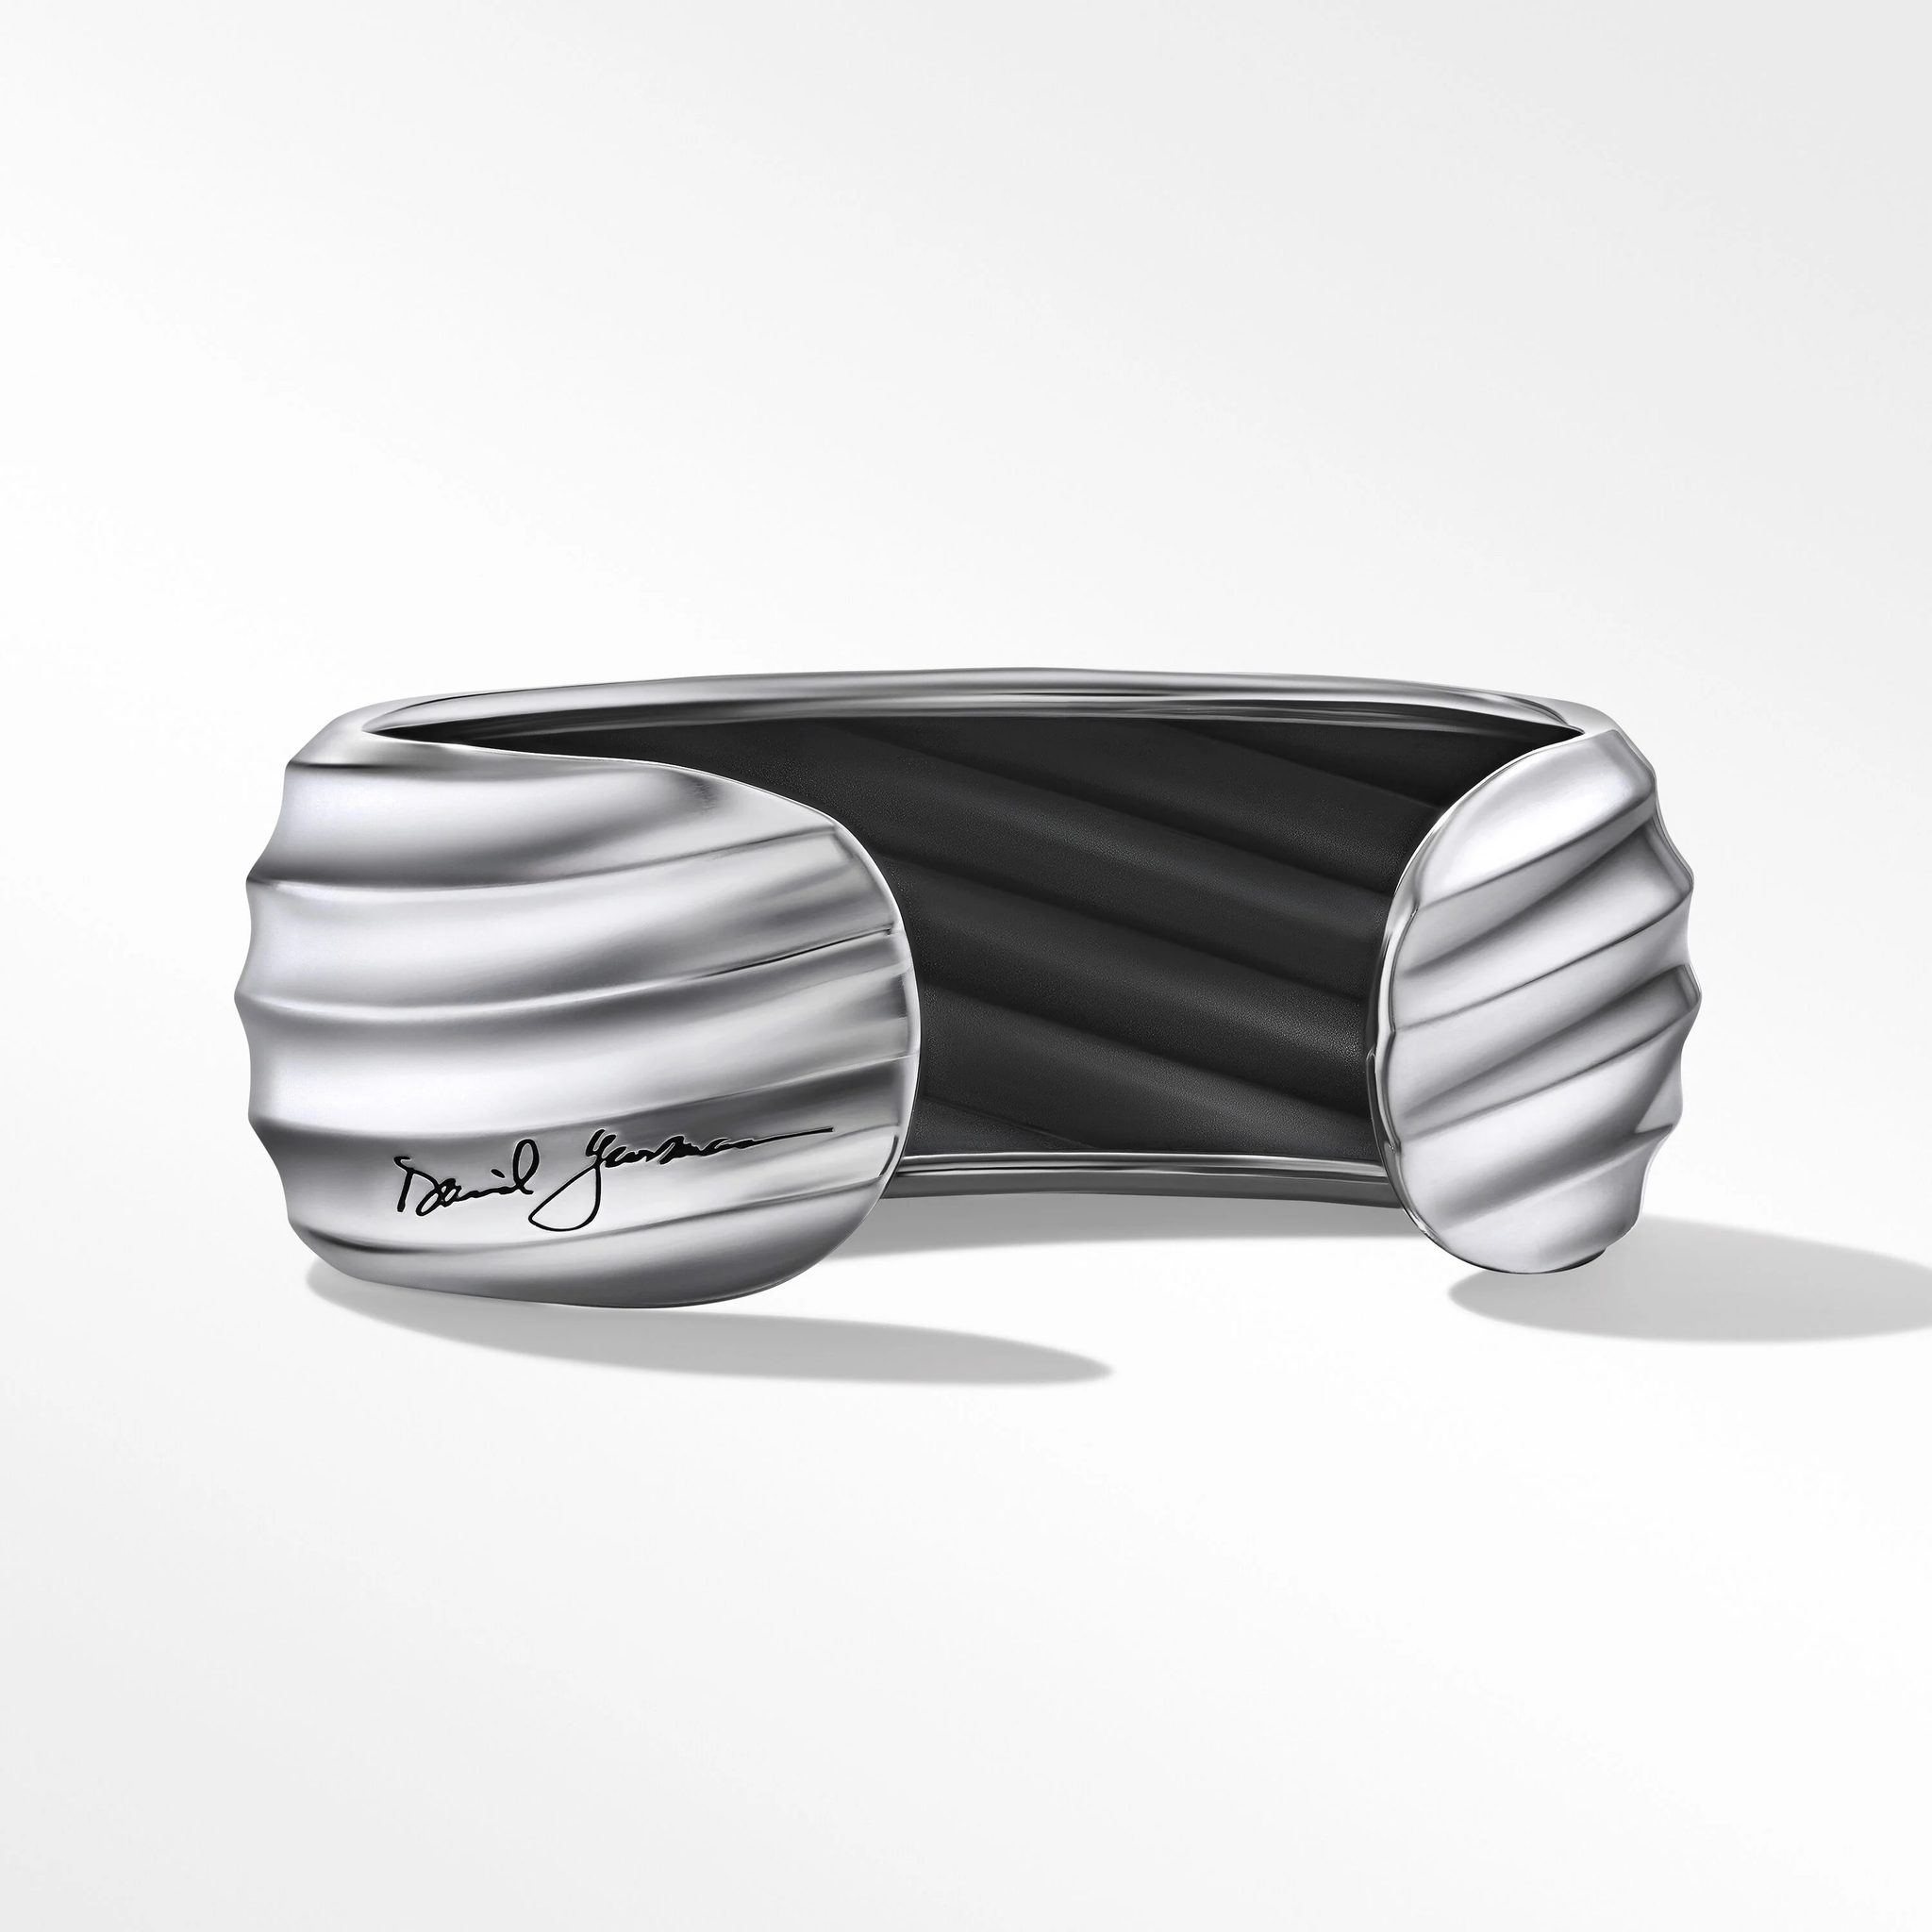 Cable Edge™ Cuff Bracelet in Recycled Sterling Silver